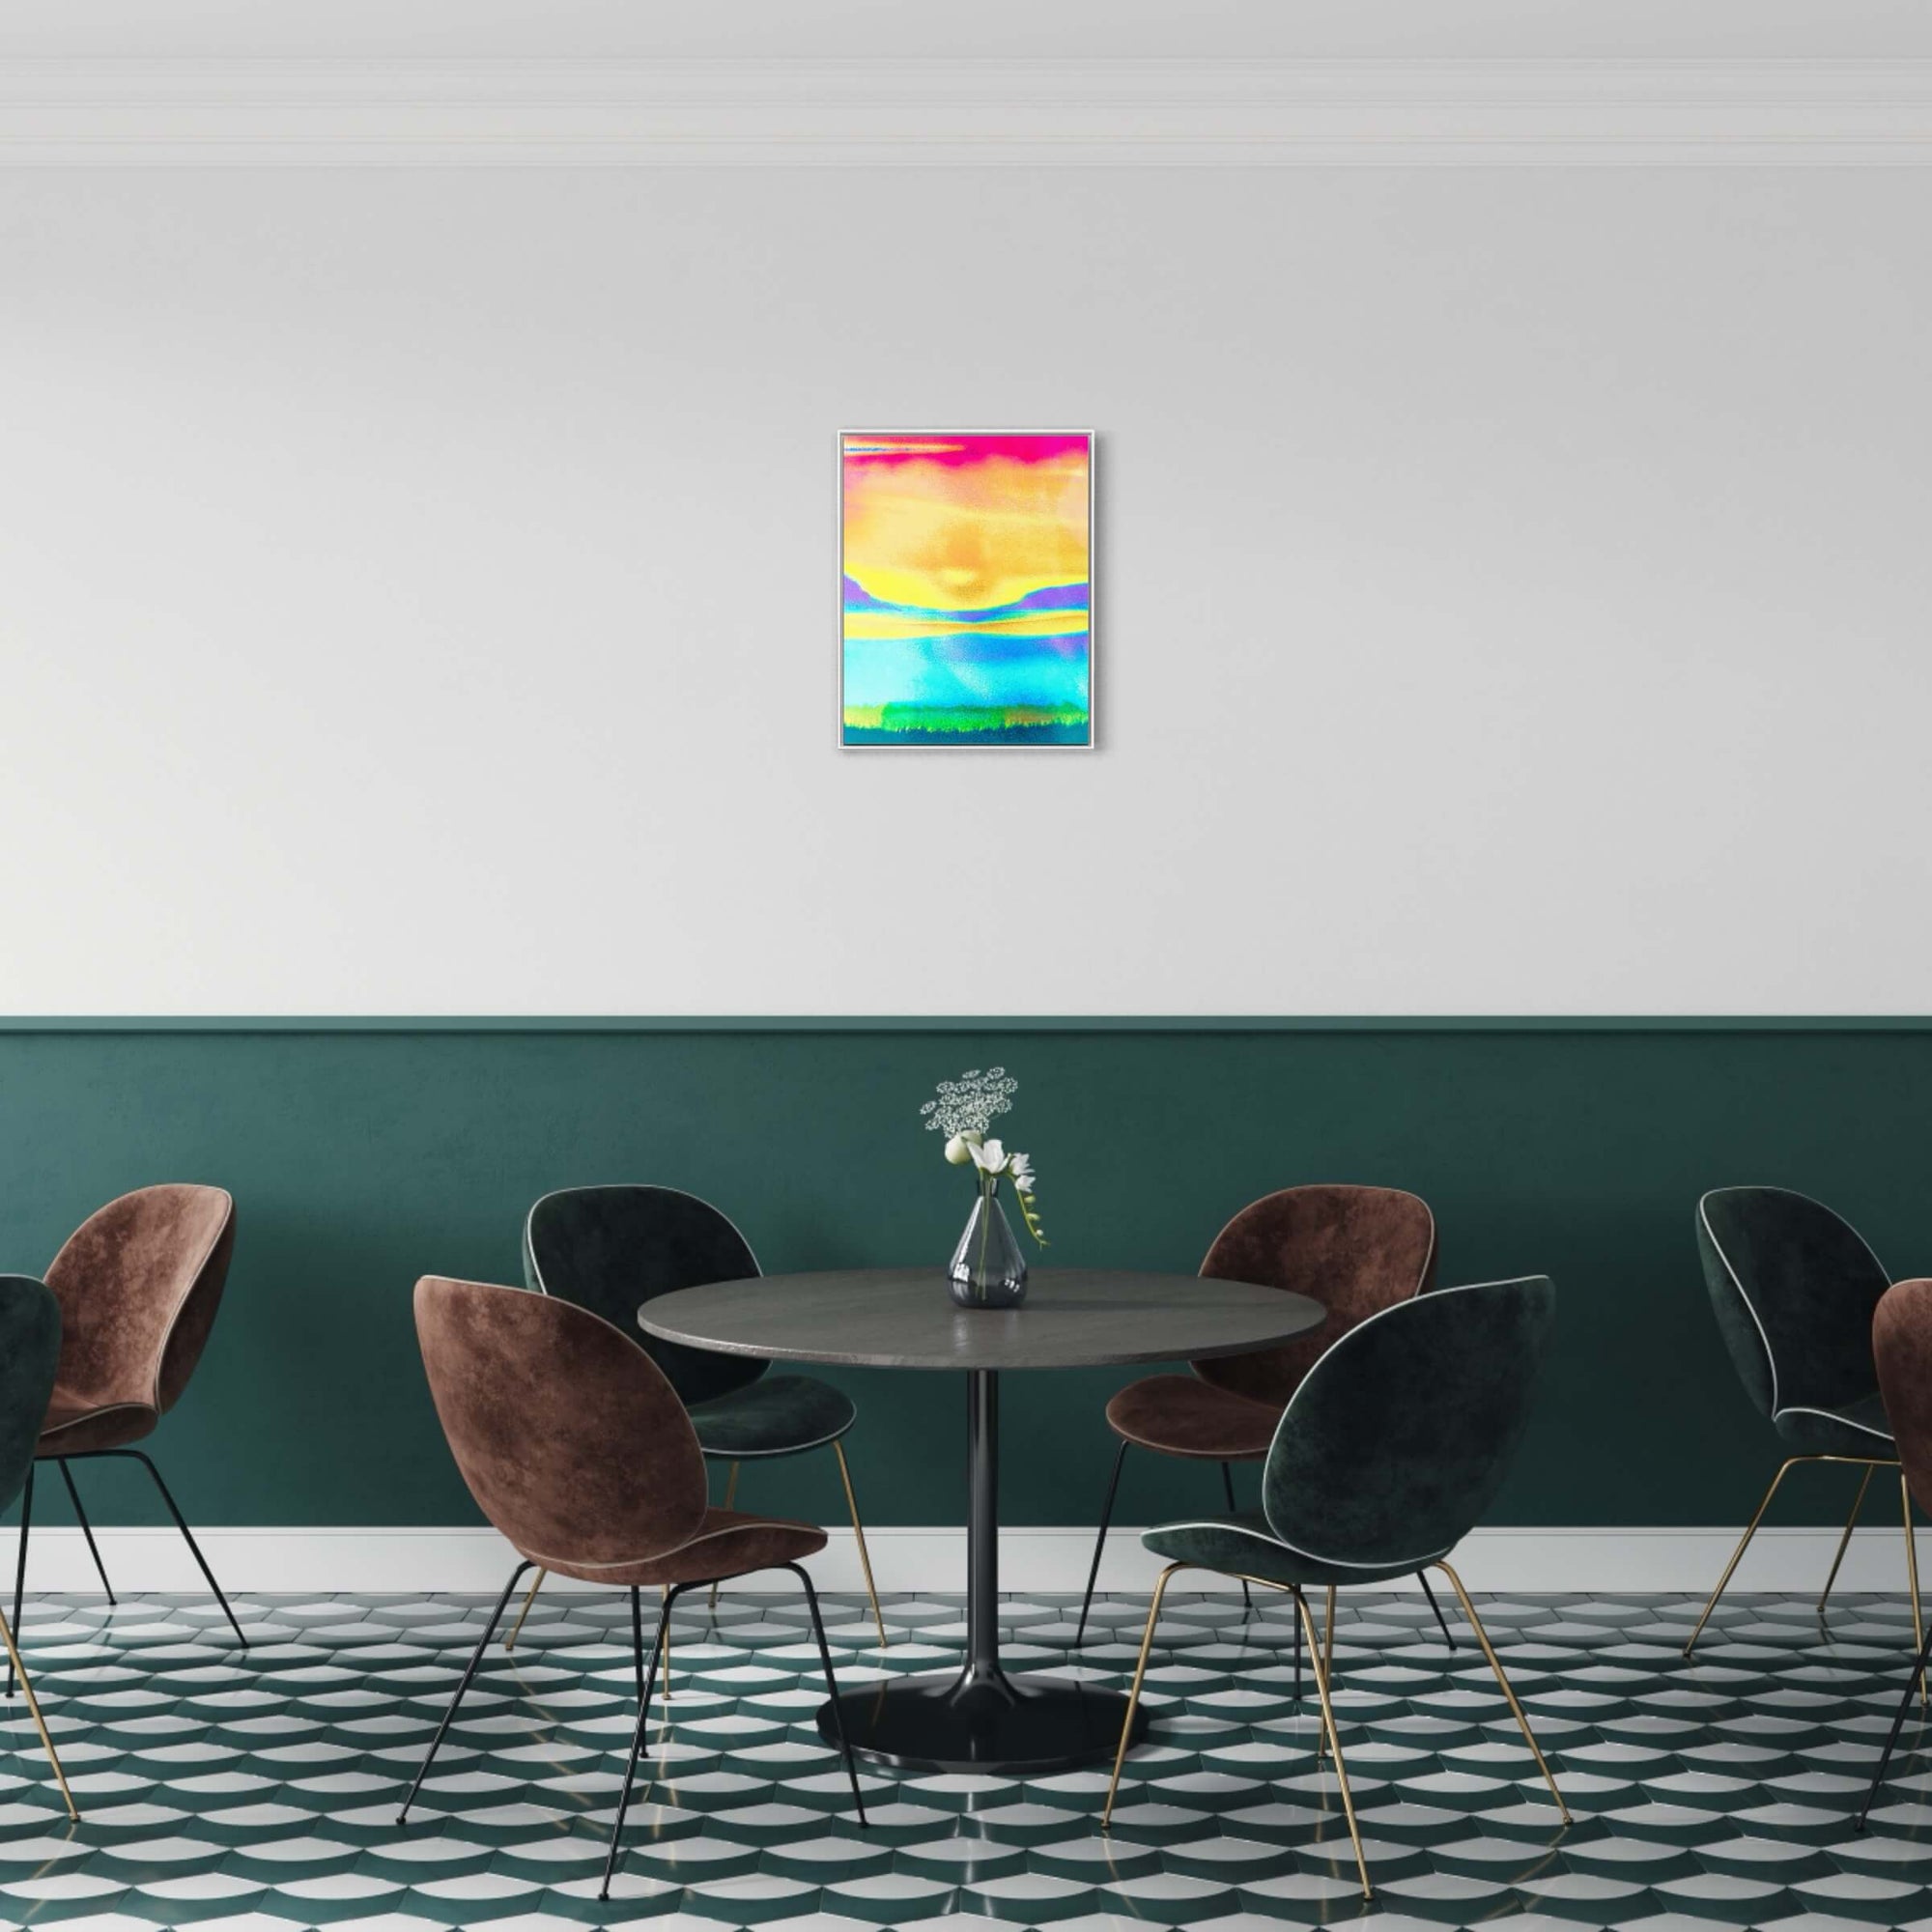 The image shows a dining area with a circular table surrounded by velvet chairs in a room with a two-tone wall. The bottom half is dark green and the top half is white. Above the table, against the white part of the wall, hangs "Raising Energy I," a bright, colourful artwork with hues of yellow, blue, and a dash of pink. The artwork adds a splash of colour and energy to the sophisticated, muted tones of the room.